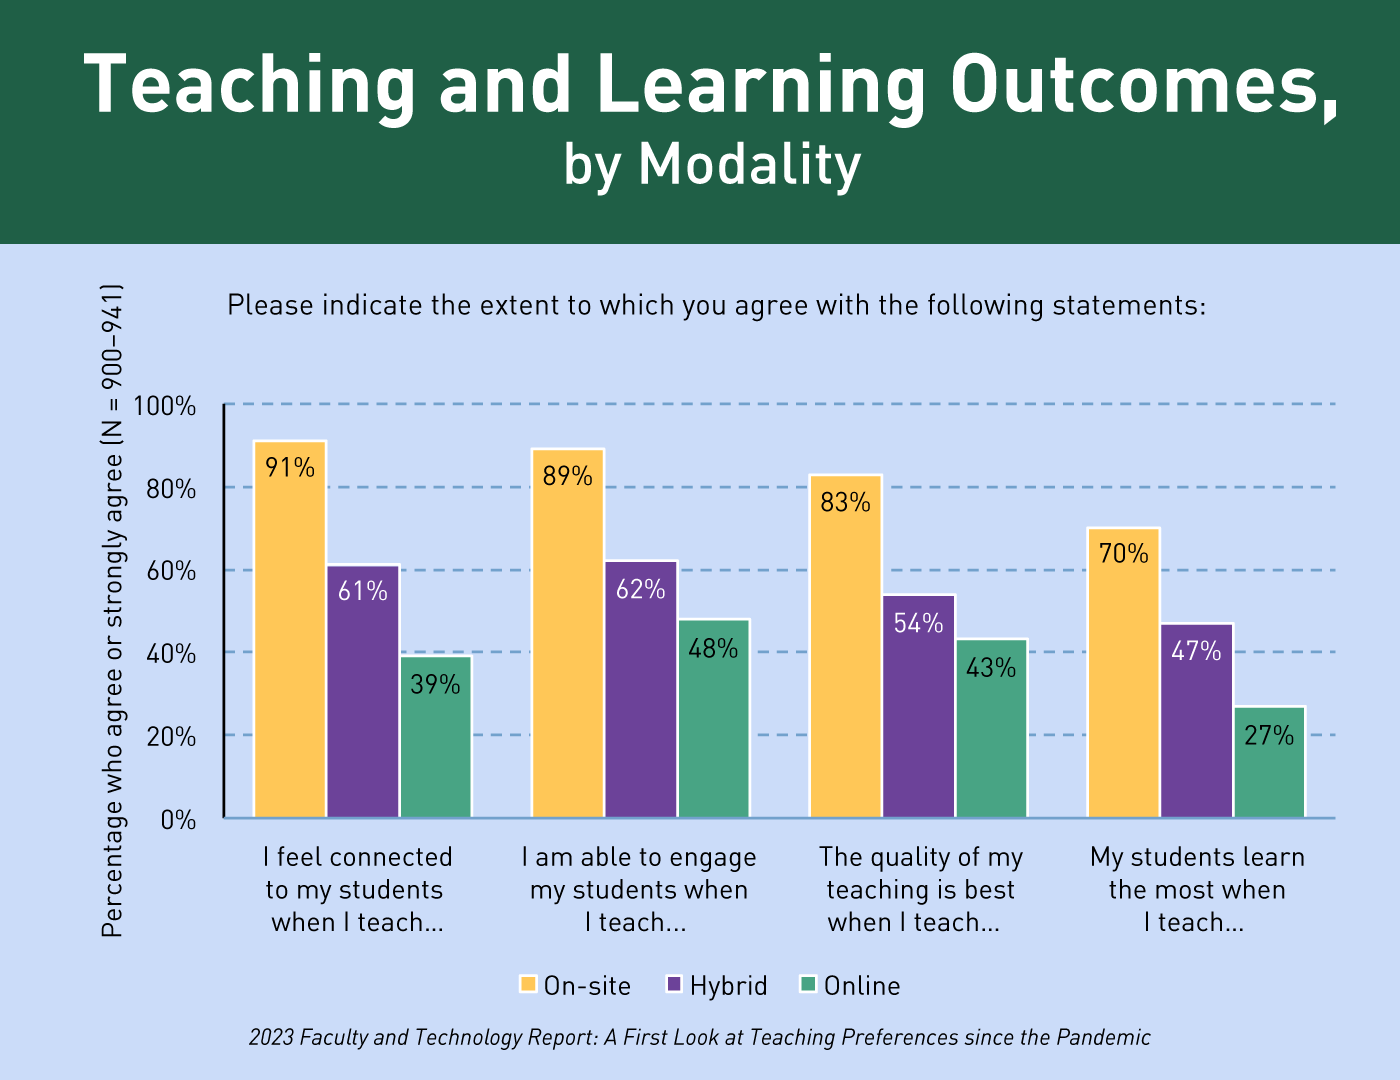 Chart showing agreement with various statements, by modality preference. Connected to students: on-site (91%), hybrid (61%), and online (39%). Able to engage with students: on-site (89%), hybrid (62%), and online (48%). Best quality of teaching: on-site (83%), hybrid (54%), and online (43%). Student learning: on-site (70%), hybrid (47%), and online (27%).